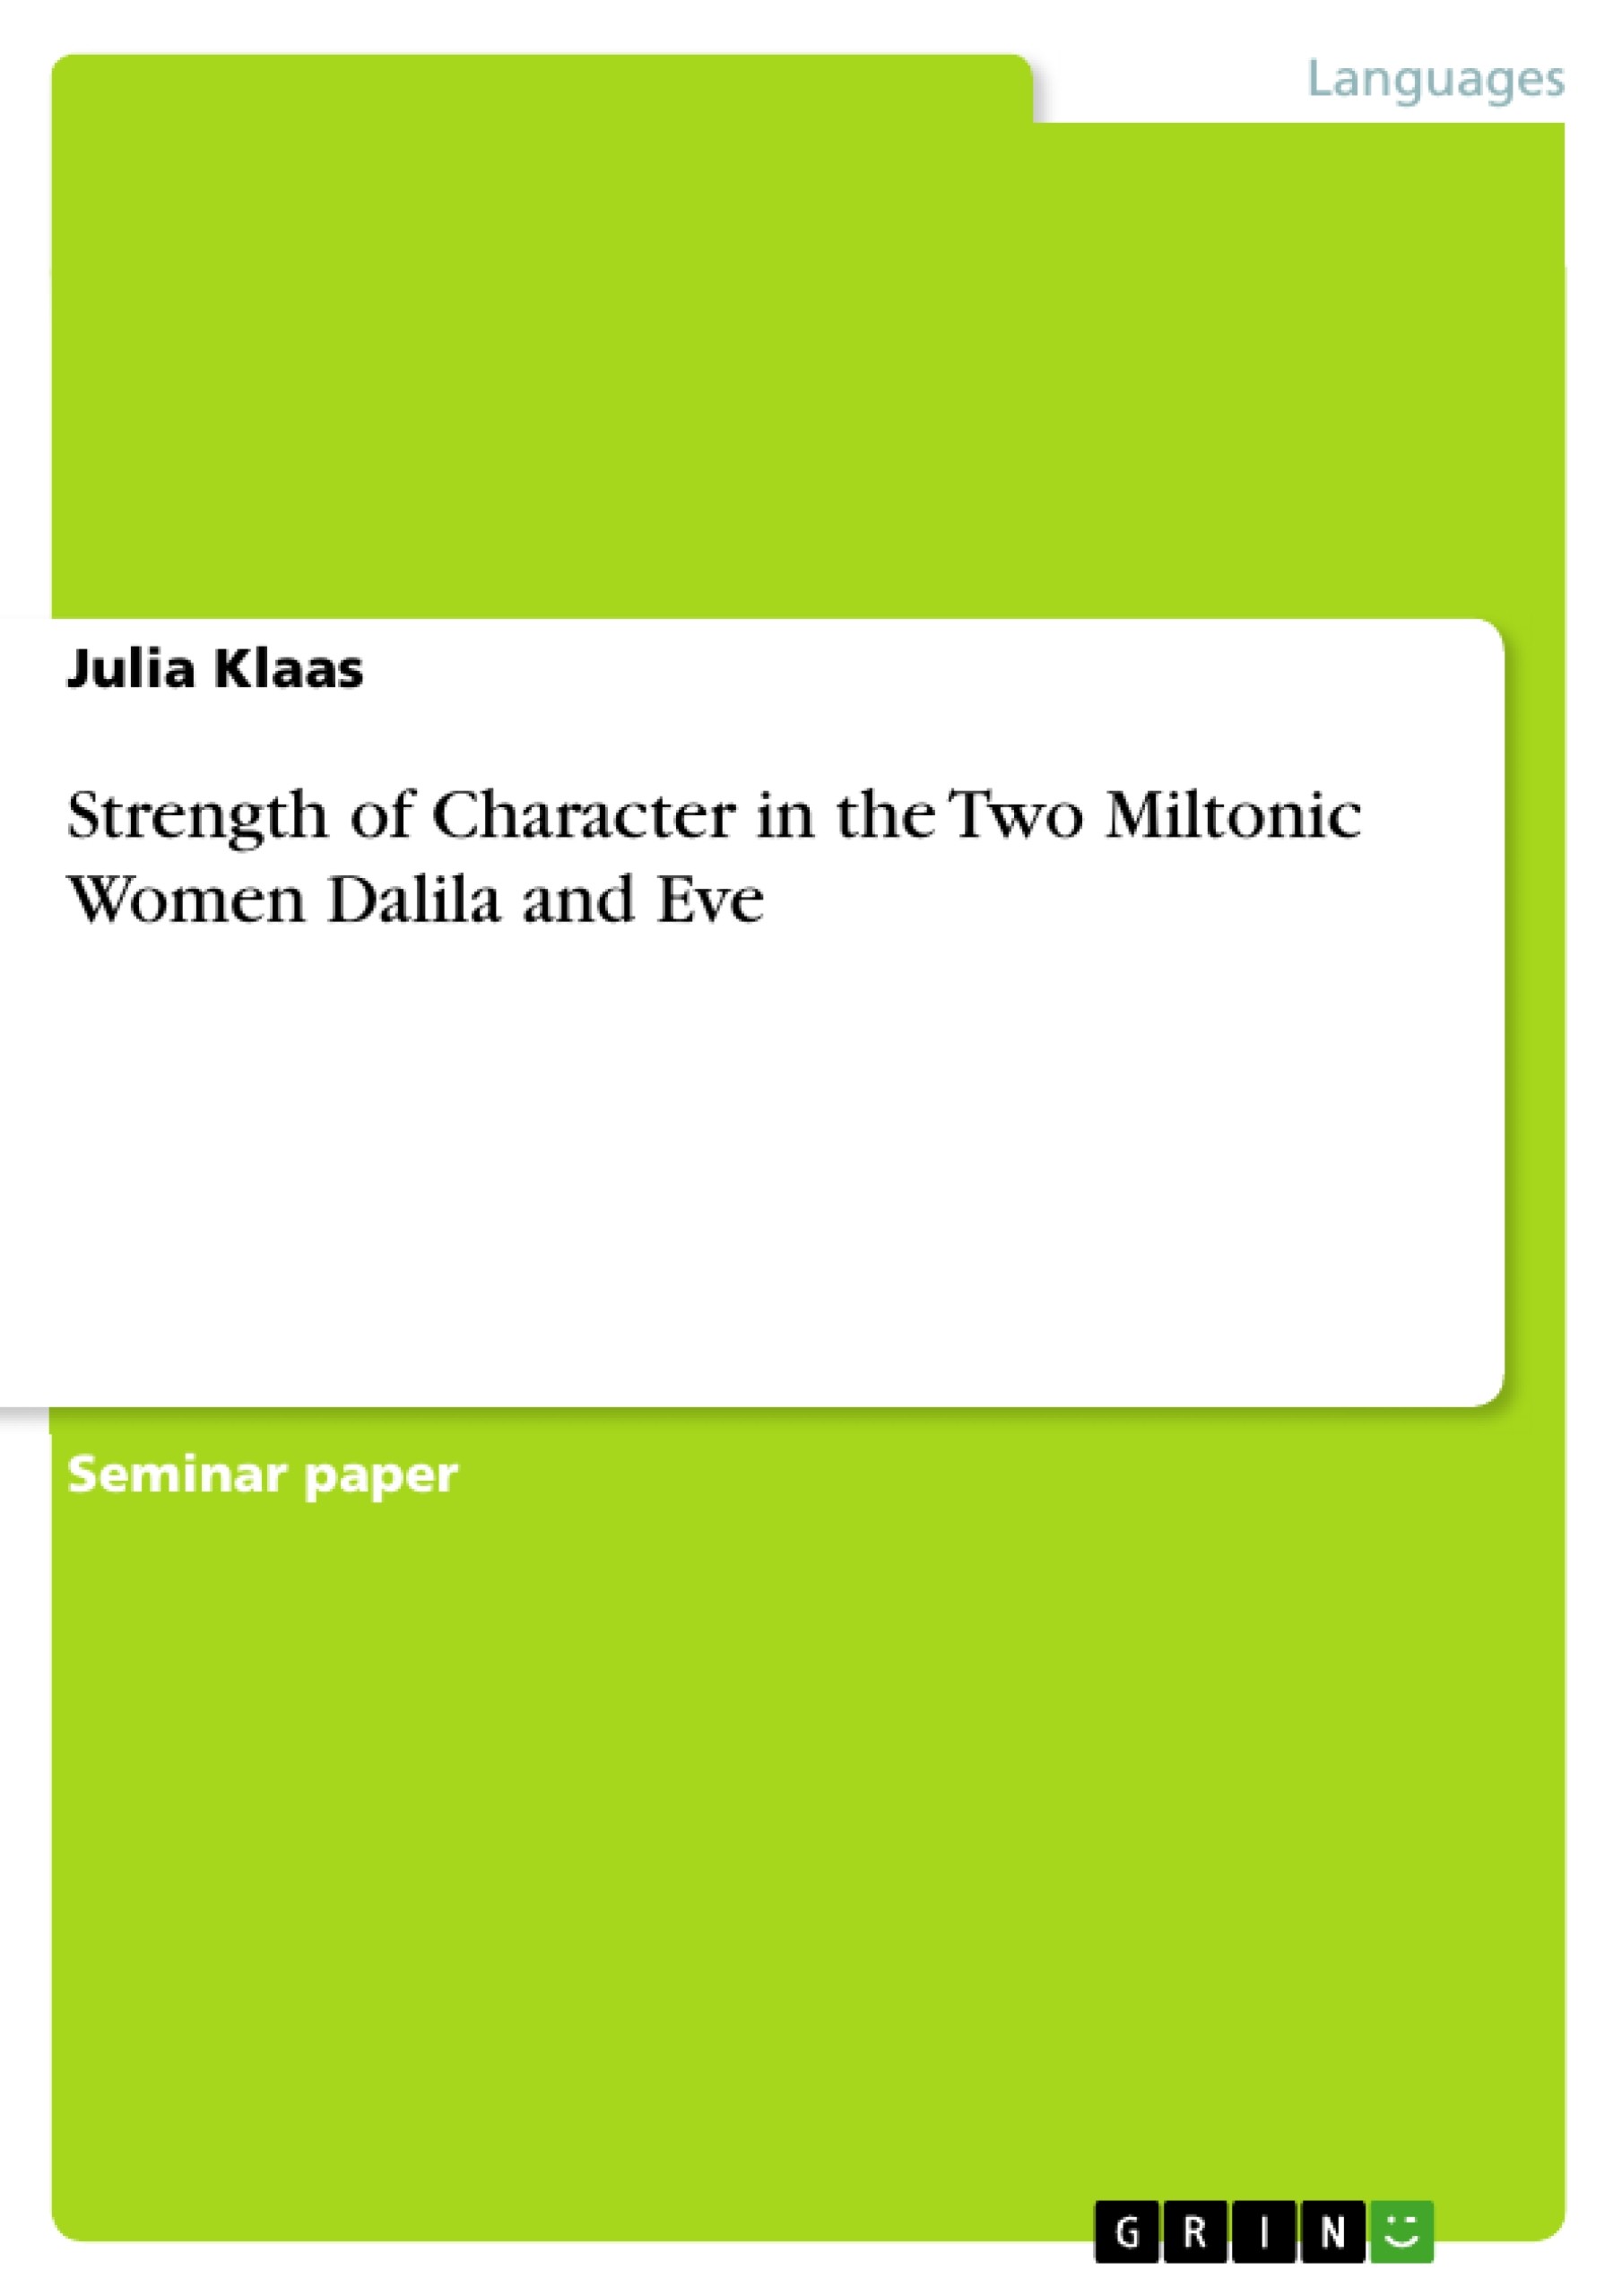 Strength of Character in the Two Miltonic Women Dalila and Eve